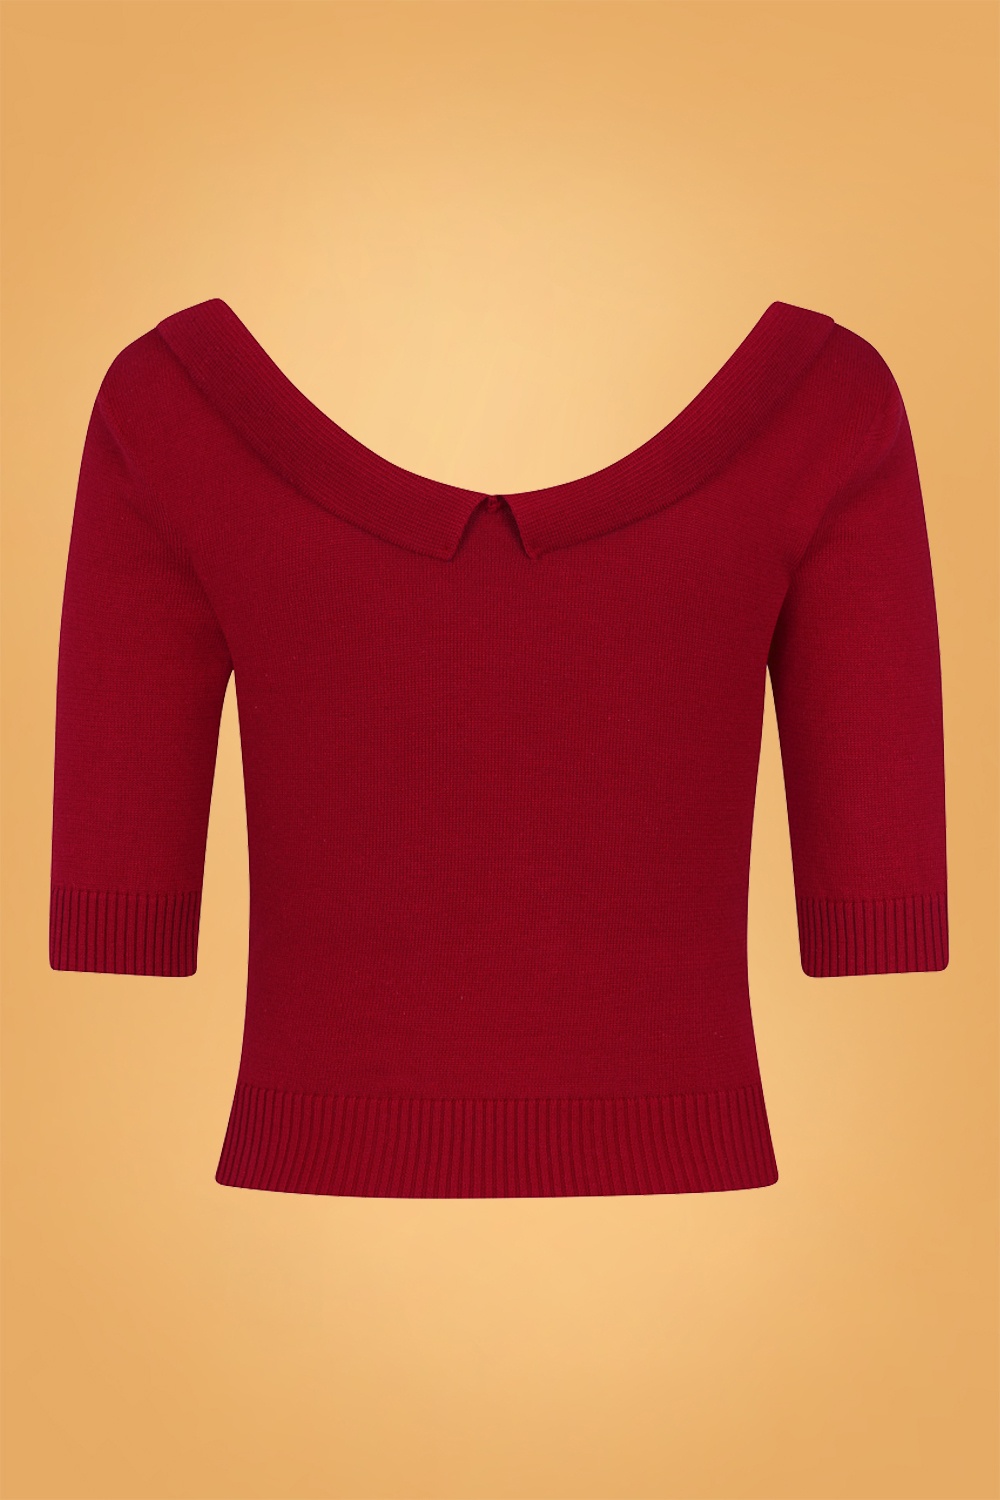 Collectif Clothing - Babette trui in rood 3